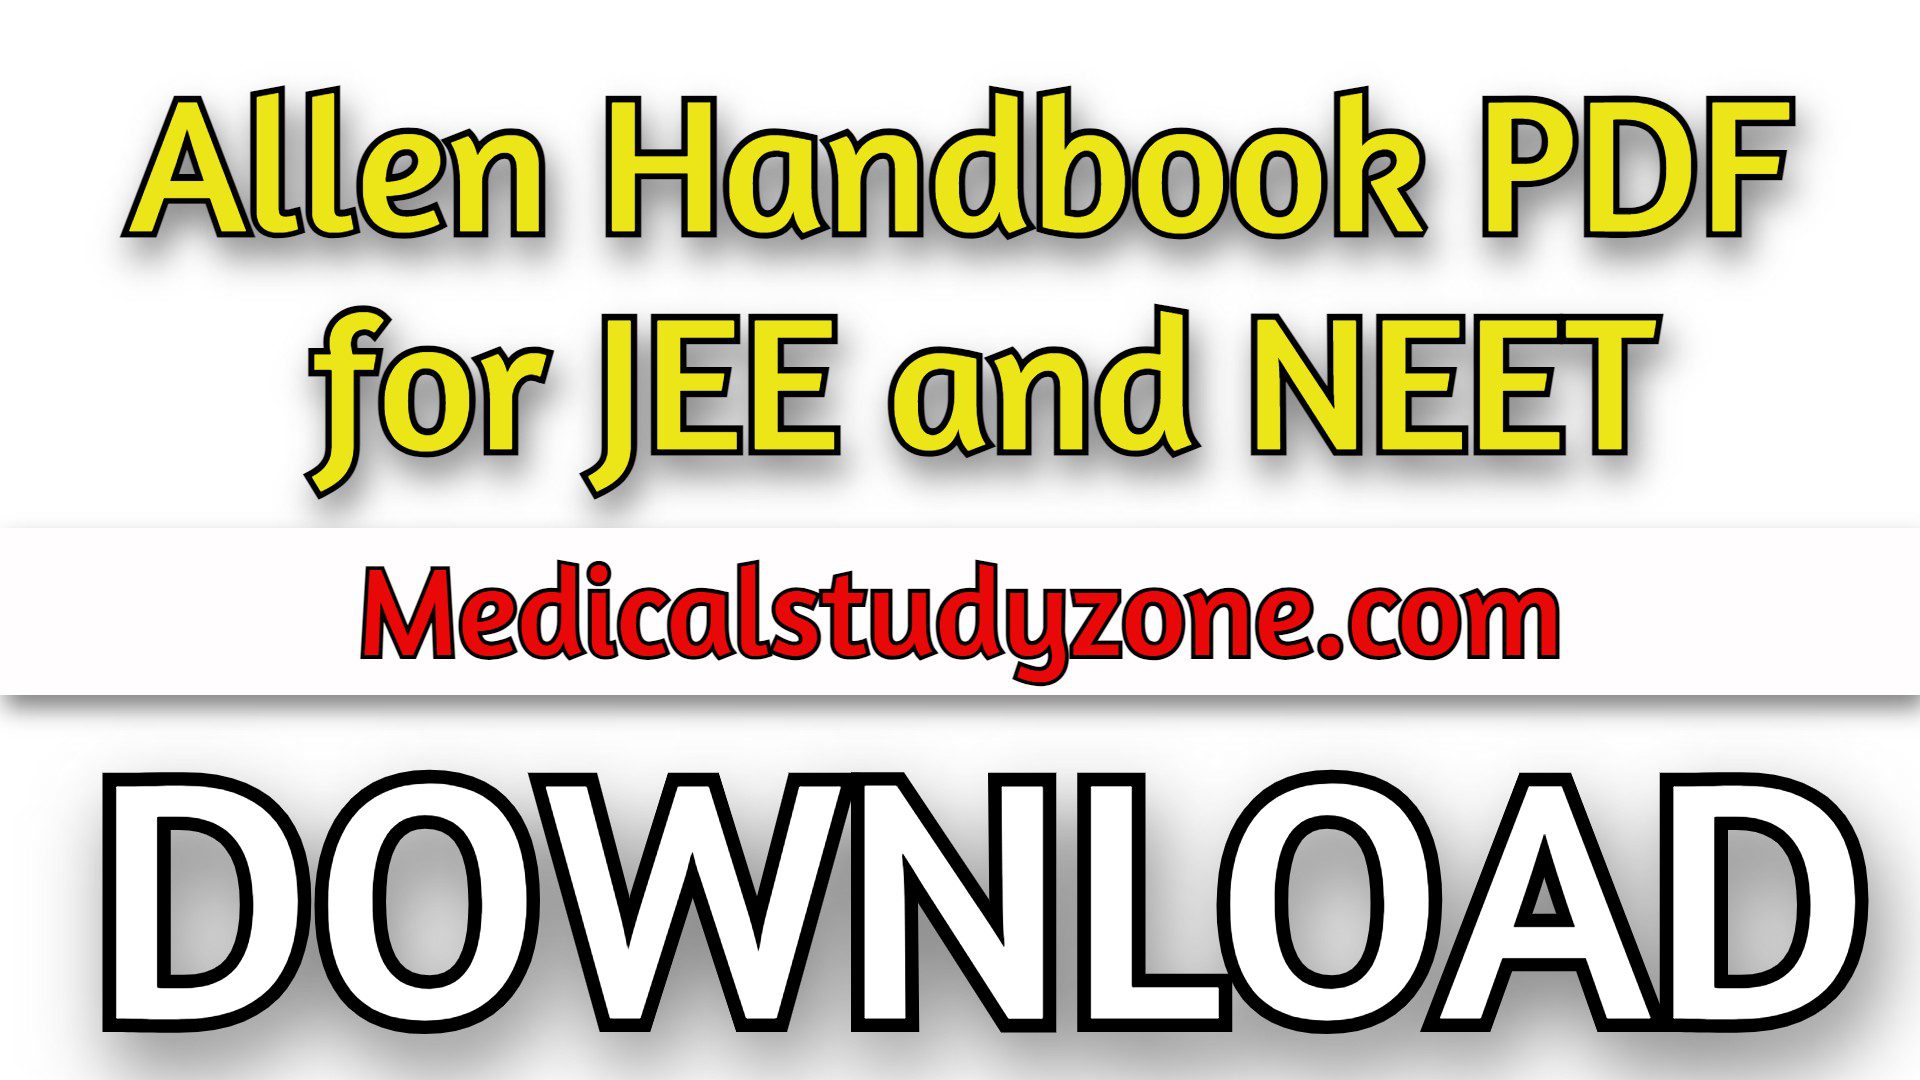 Allen Handbooks PDF 2021 [Complete Series] for JEE and NEET Free Download